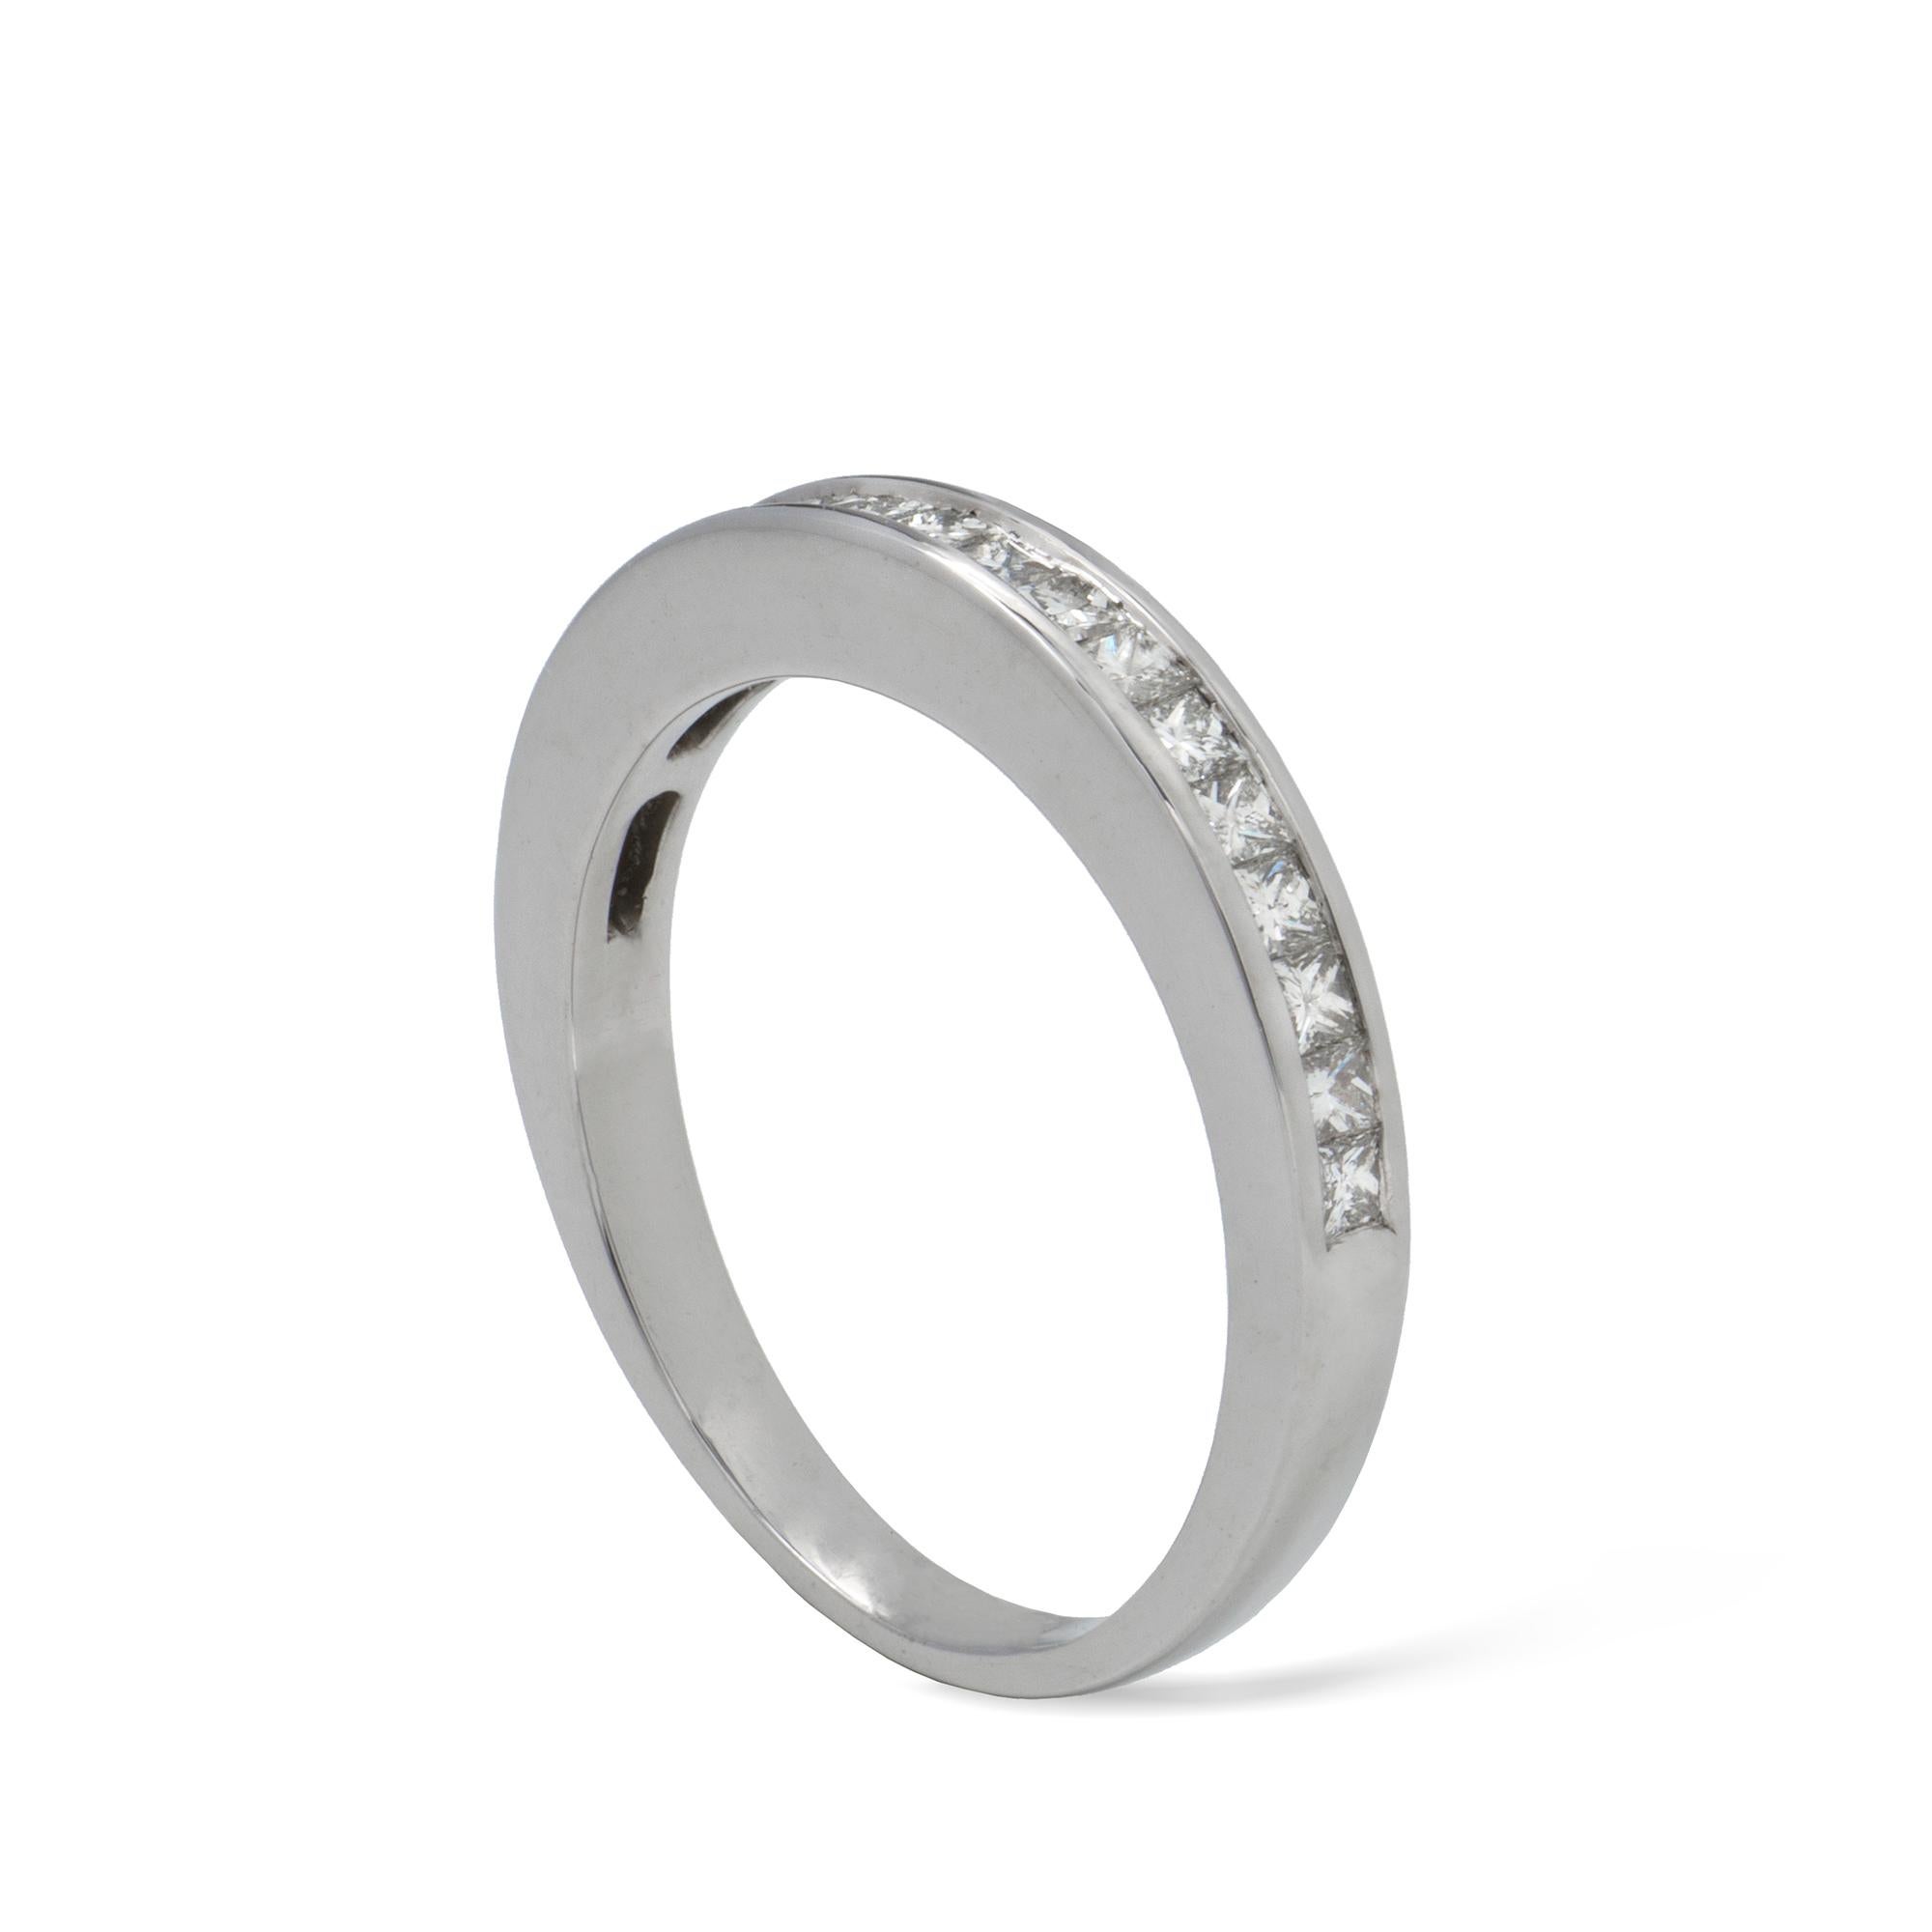 A half eternity diamond ring, the nineteen princess-cut diamonds with total estimated weight 0.50 carats, channel-set in a white gold mount, hallmarked 18ct gold London, bearing the Bentley & Skinner sponsor-mark, meassuring 2.6mm wide, finger size